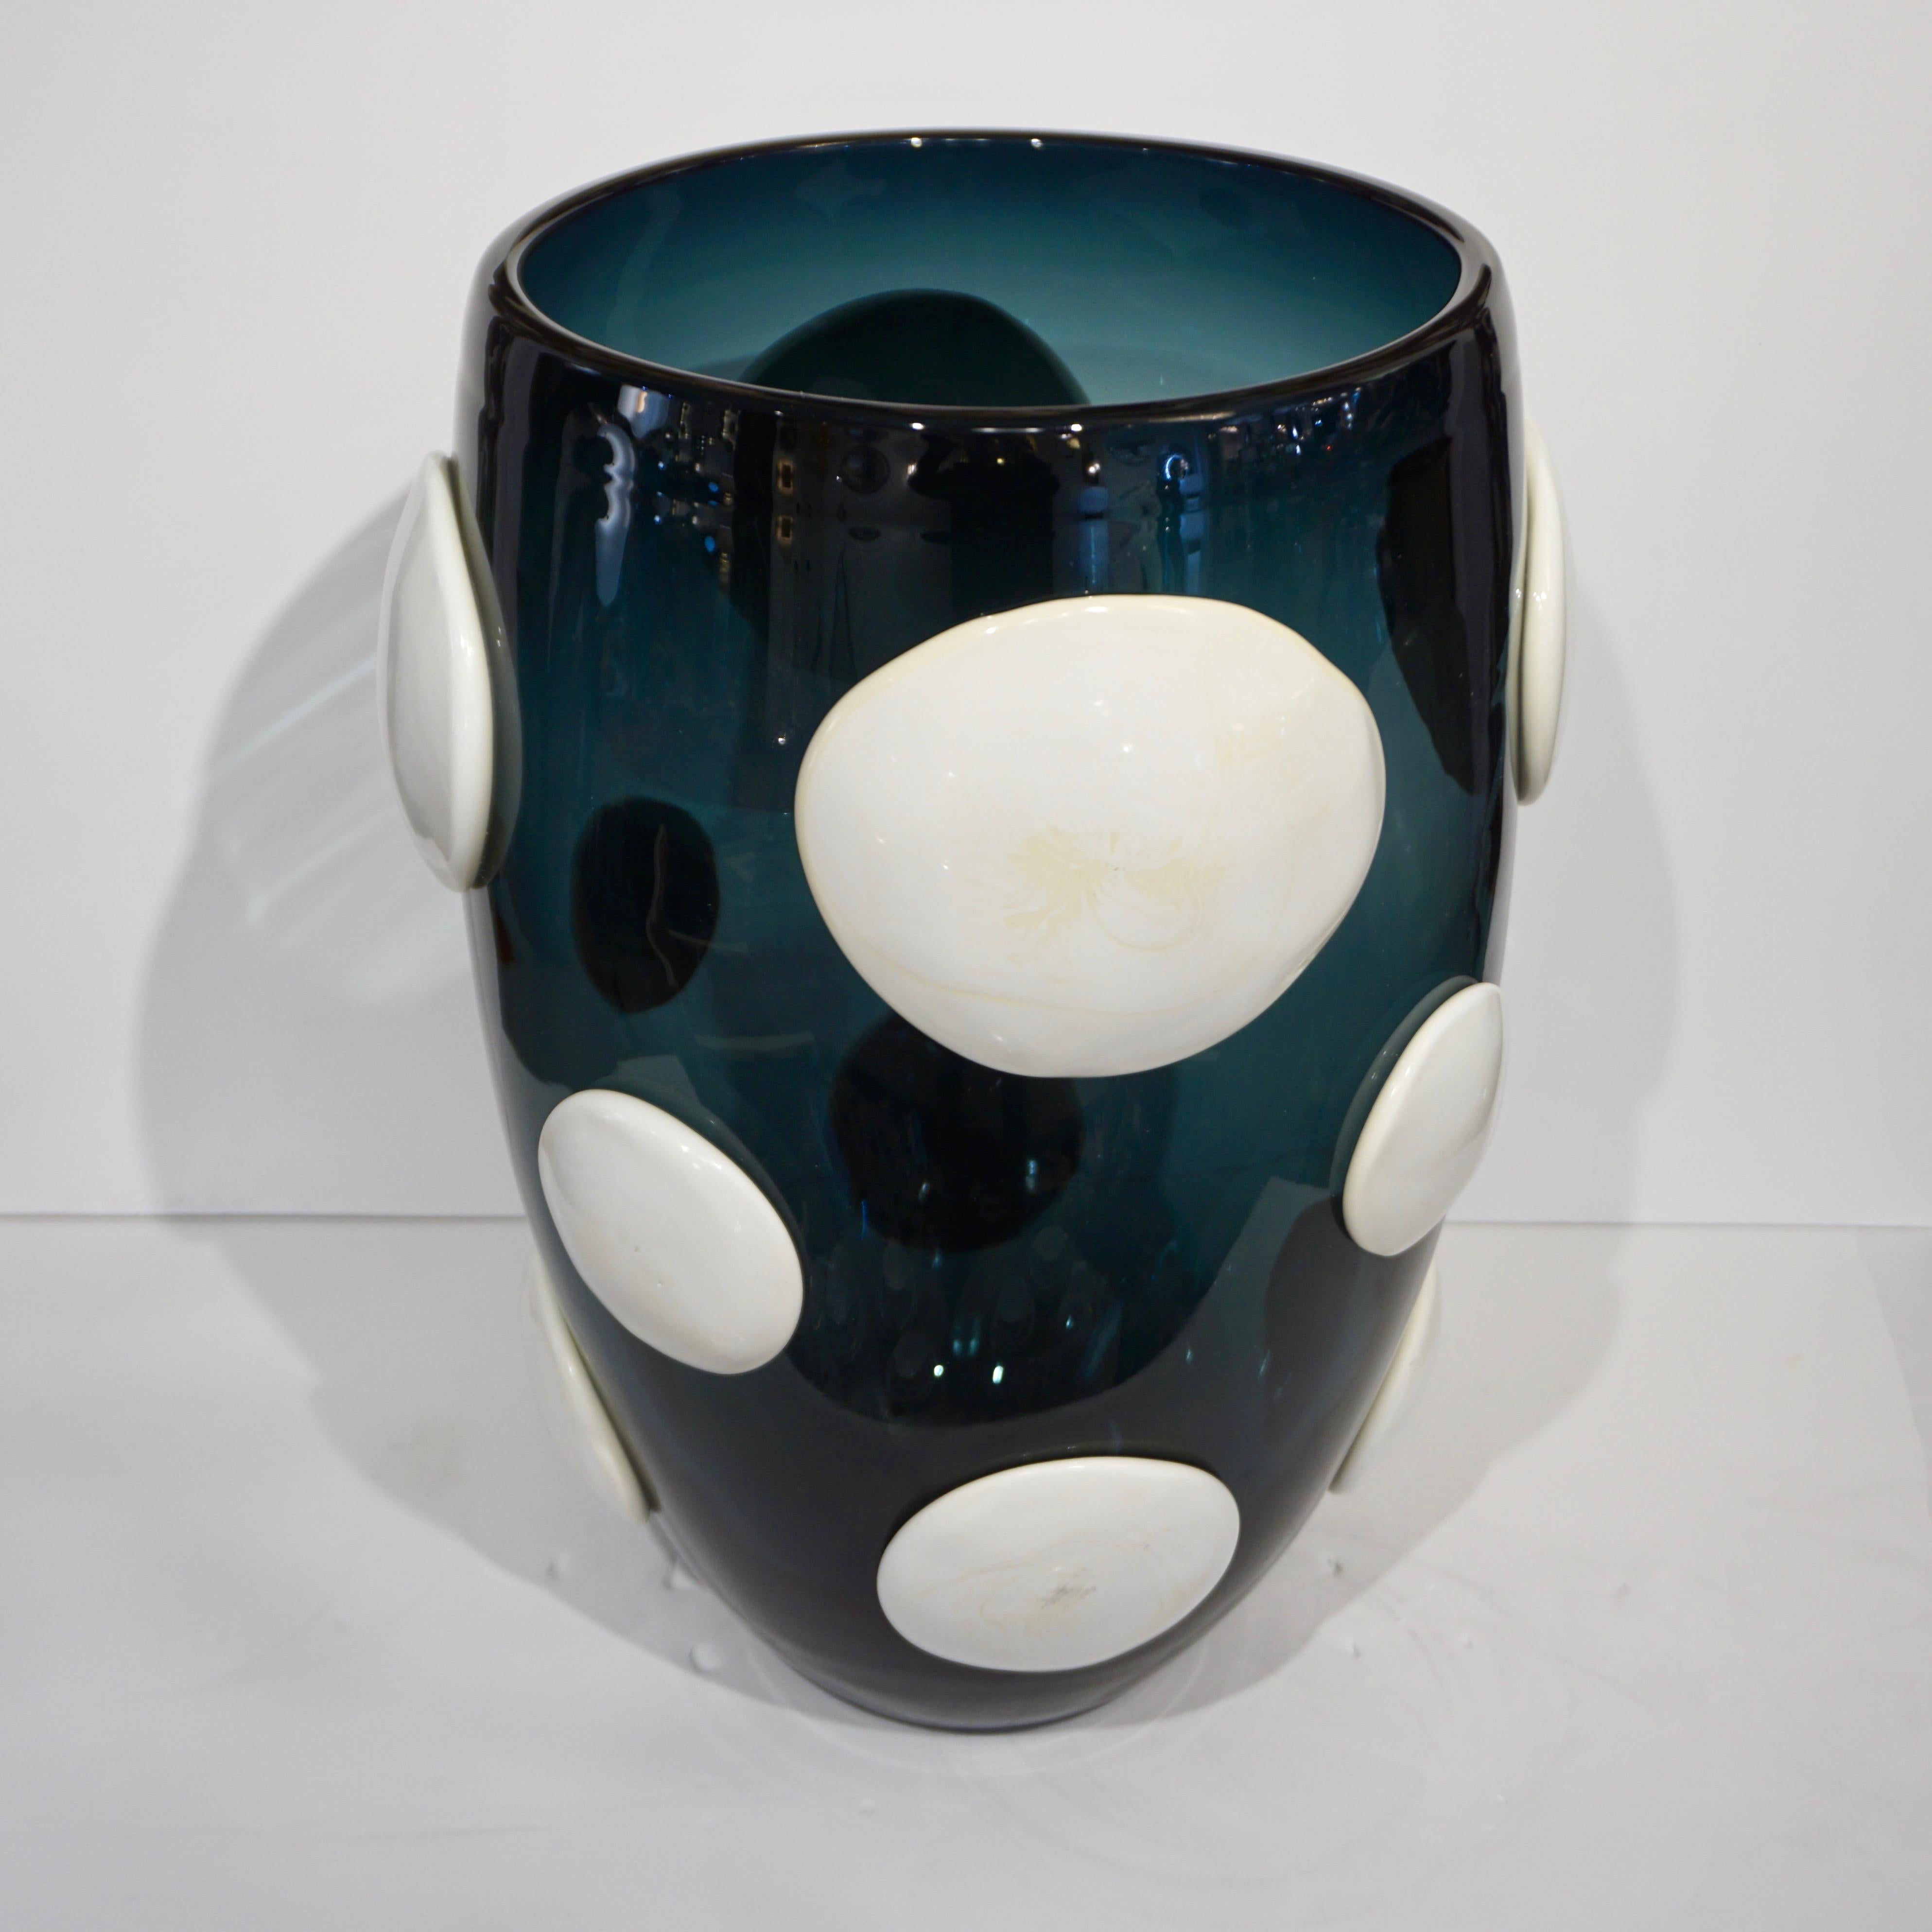 A monumental blown vase by Andrea Zilio, in a rare smoked navy teal Murano glass with a transparency that picks up aquamarine tinted reflections, decorated with polka dots in white glass paste, circa 2000, Italy. Signed piece.
Diameter of the rim: